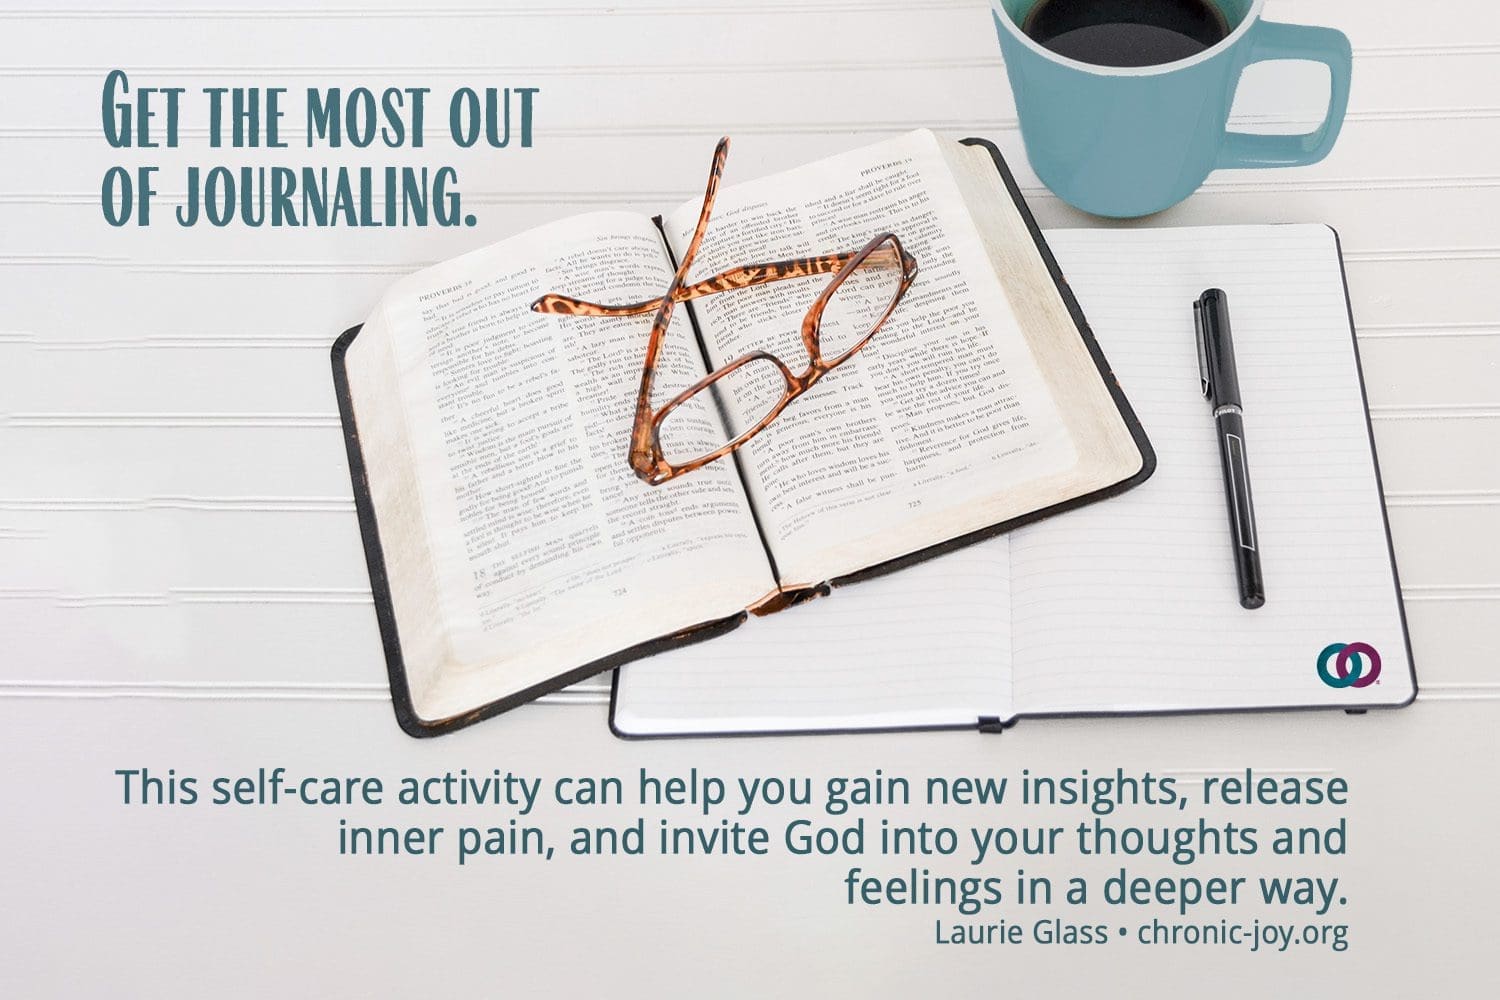 Get the most out of journaling.